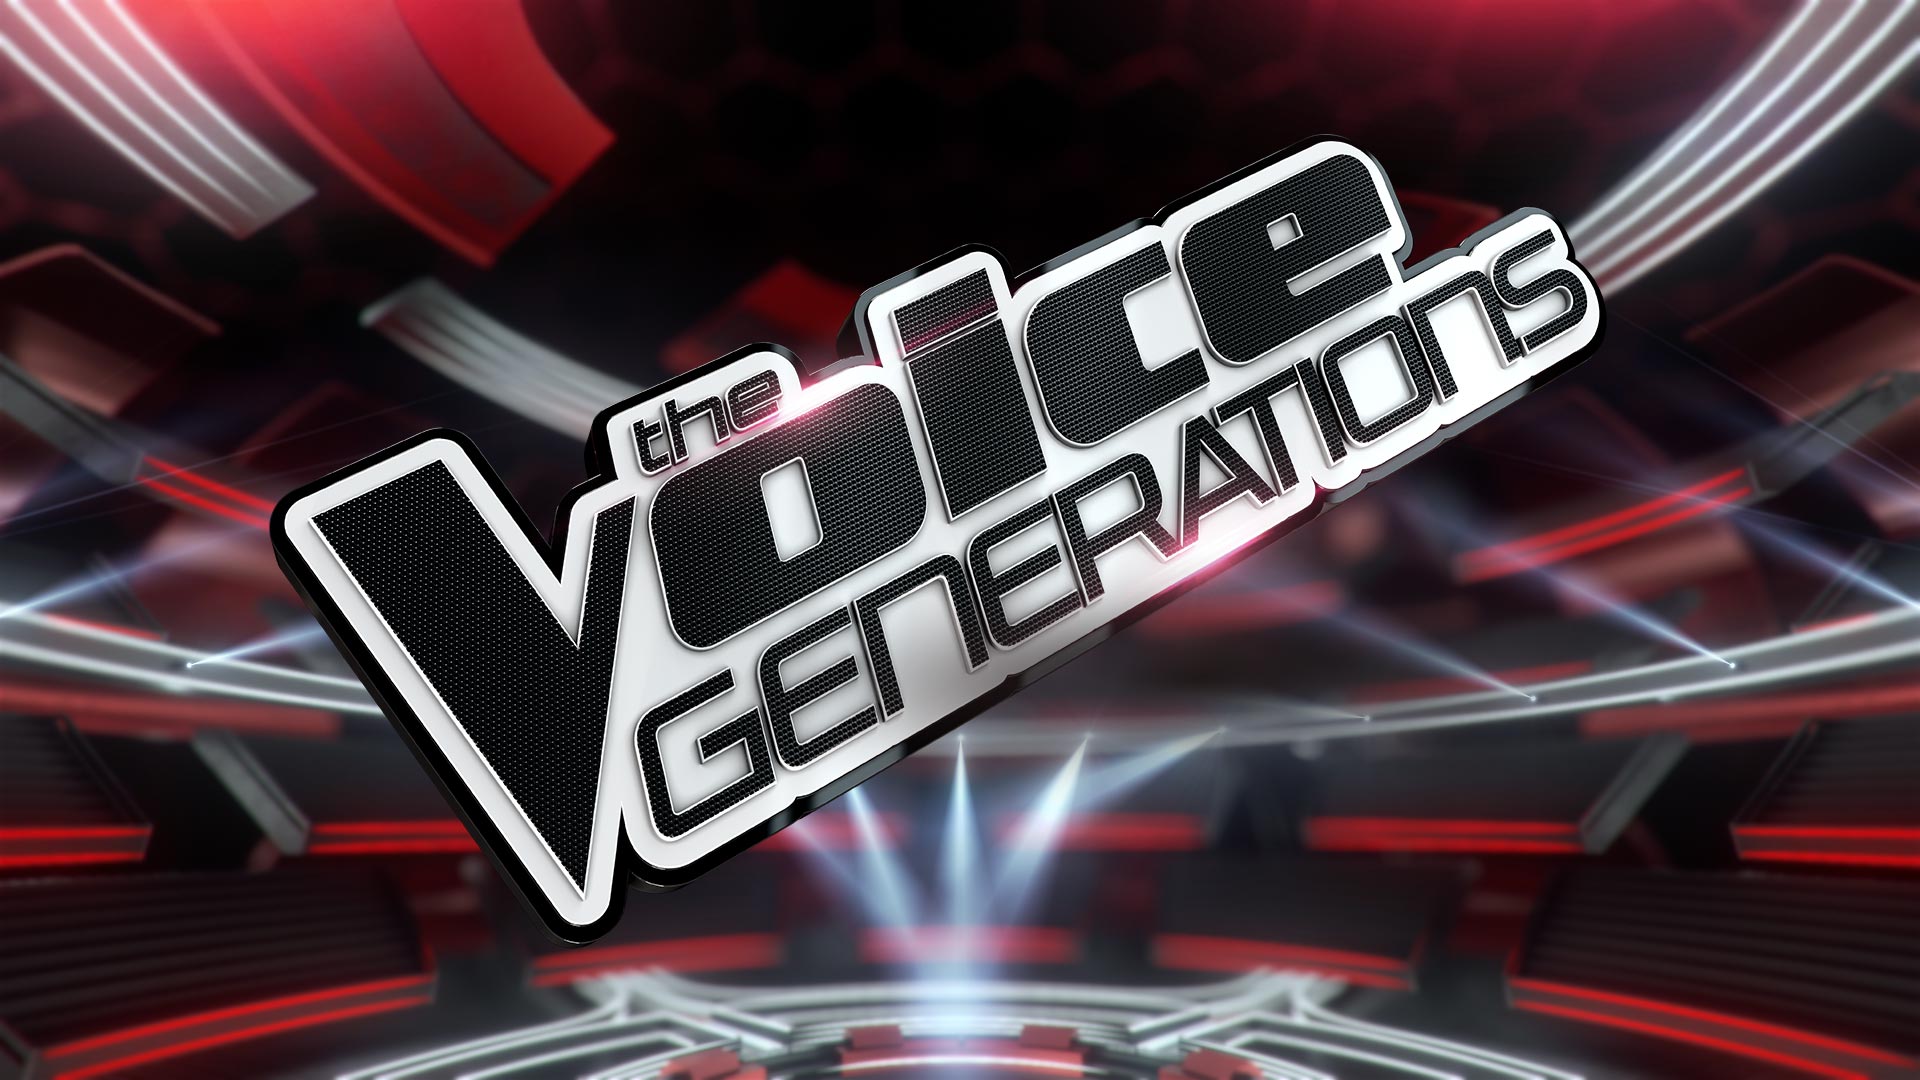 The Voice Generations